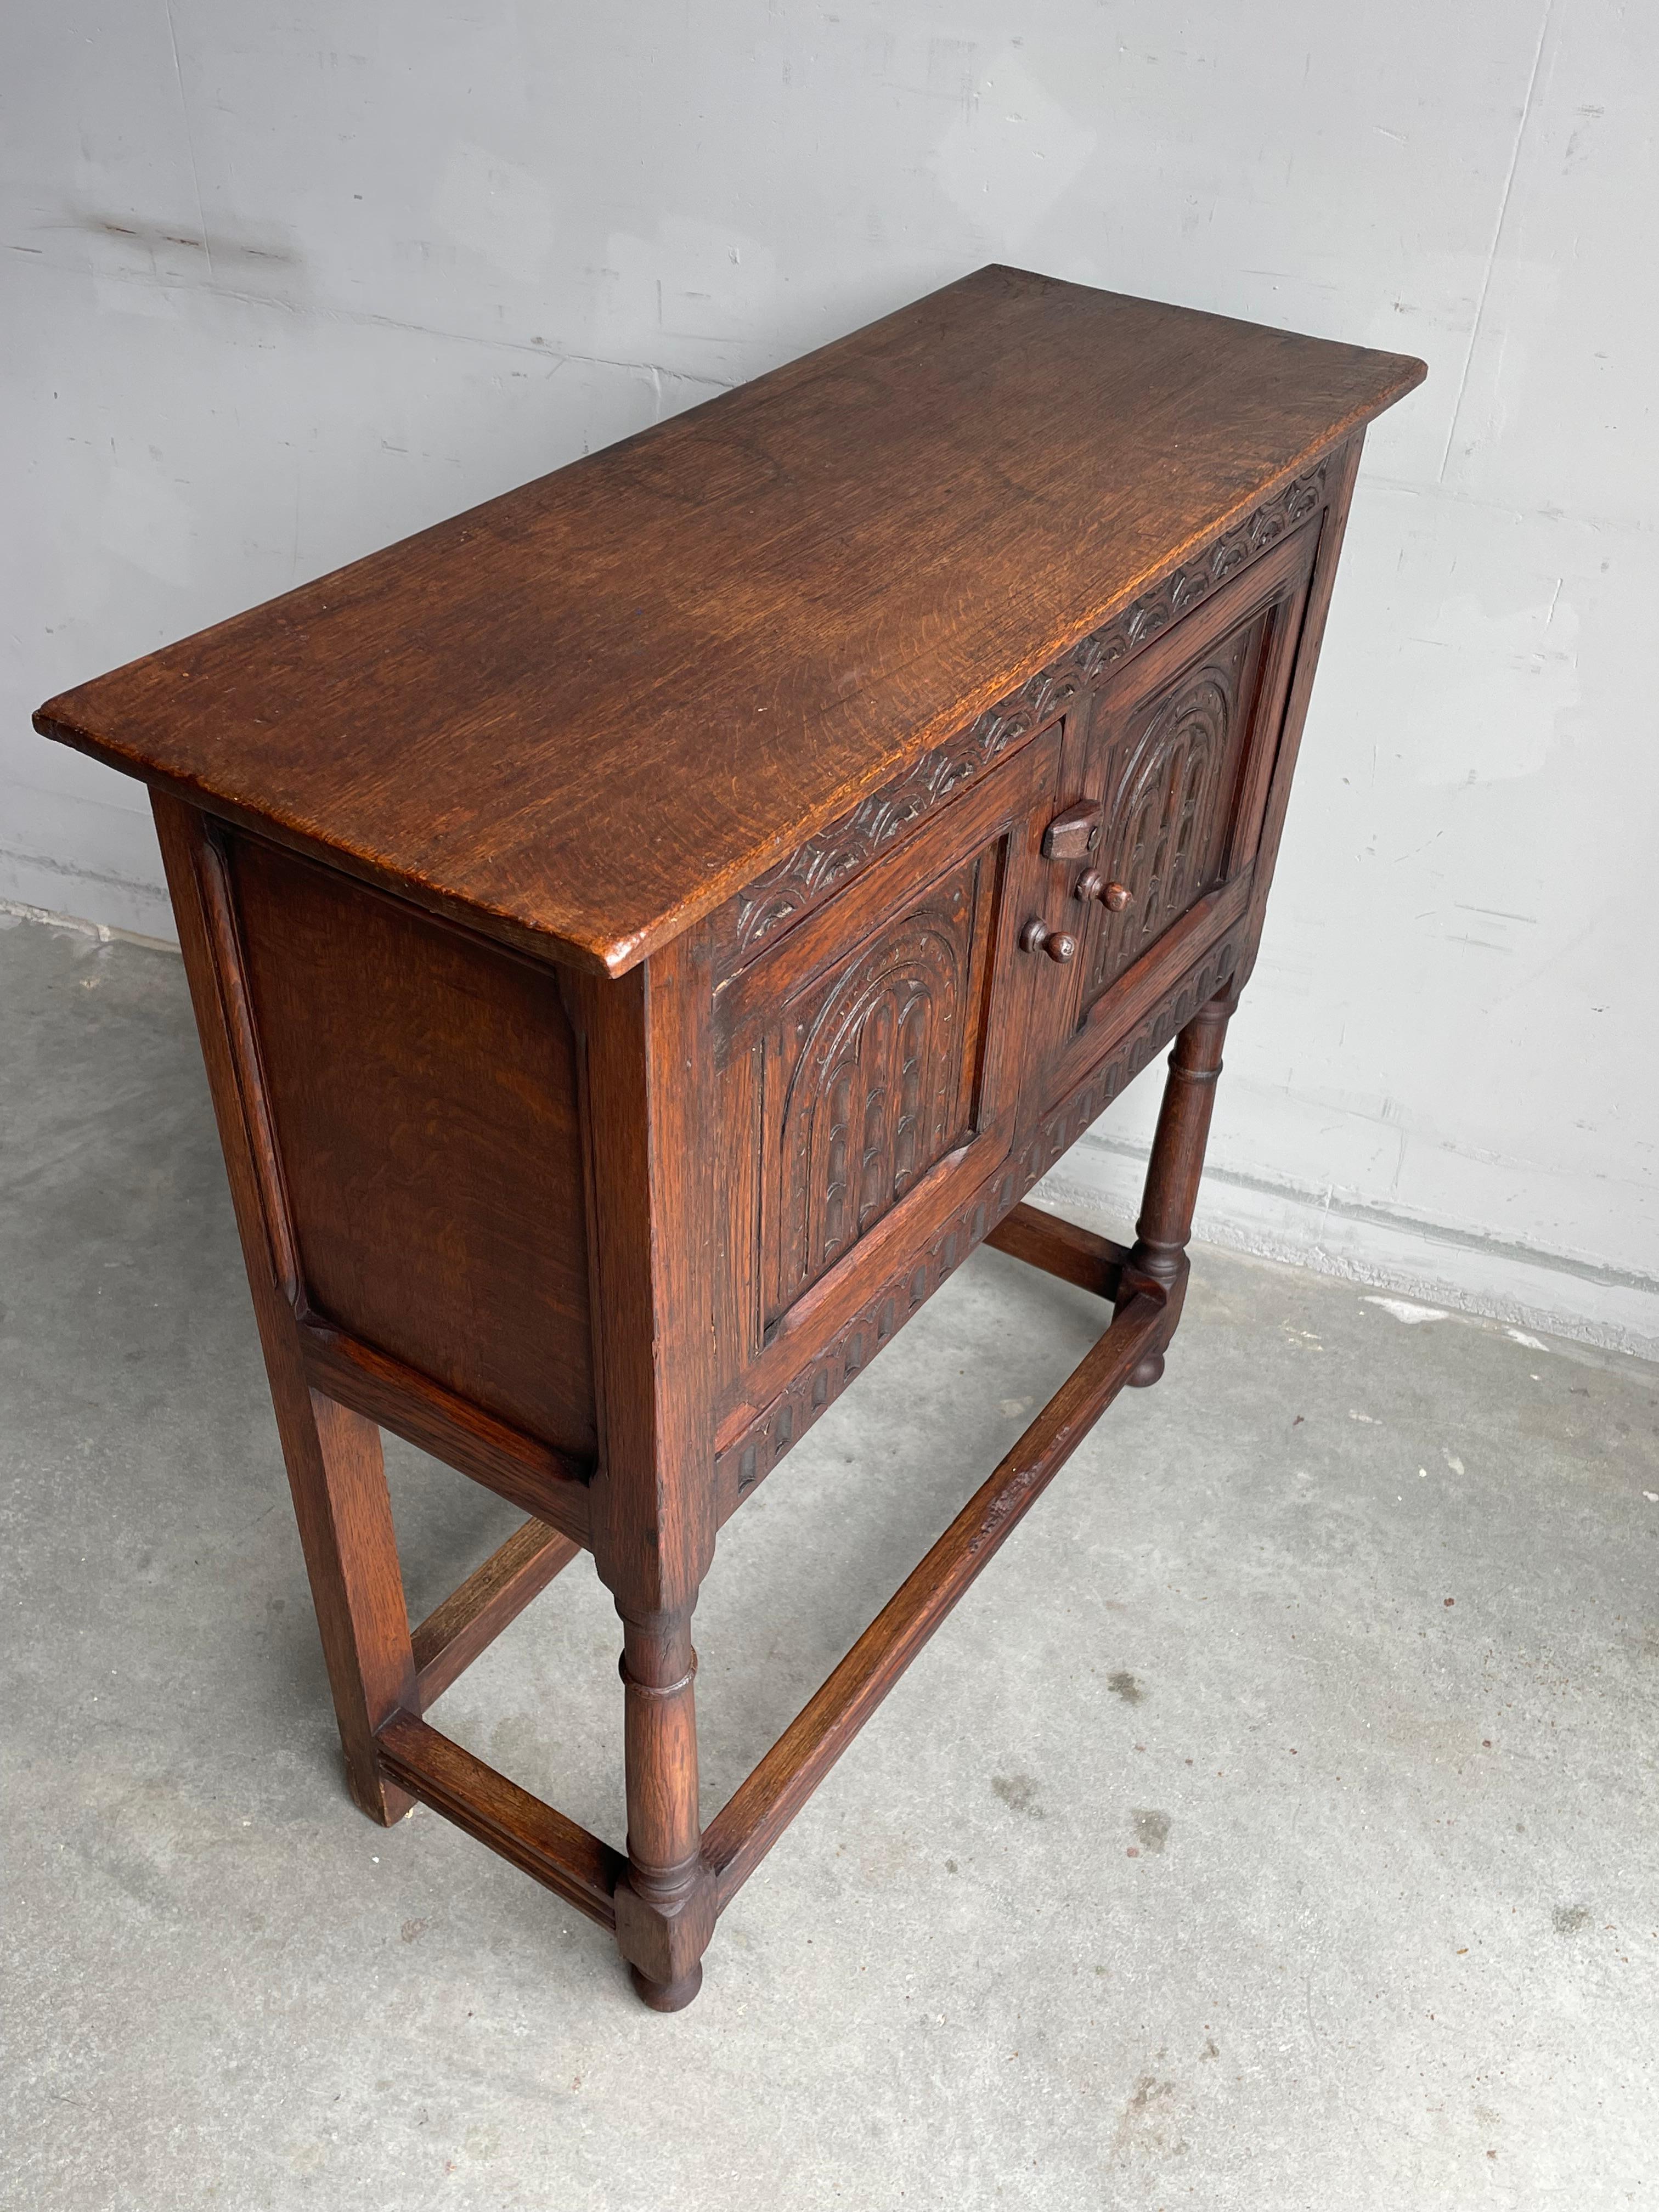 Wrought Iron Practical Size Dutch Gothic Revival Solid Oak Sidetable / Small Cabinet Mid-1800